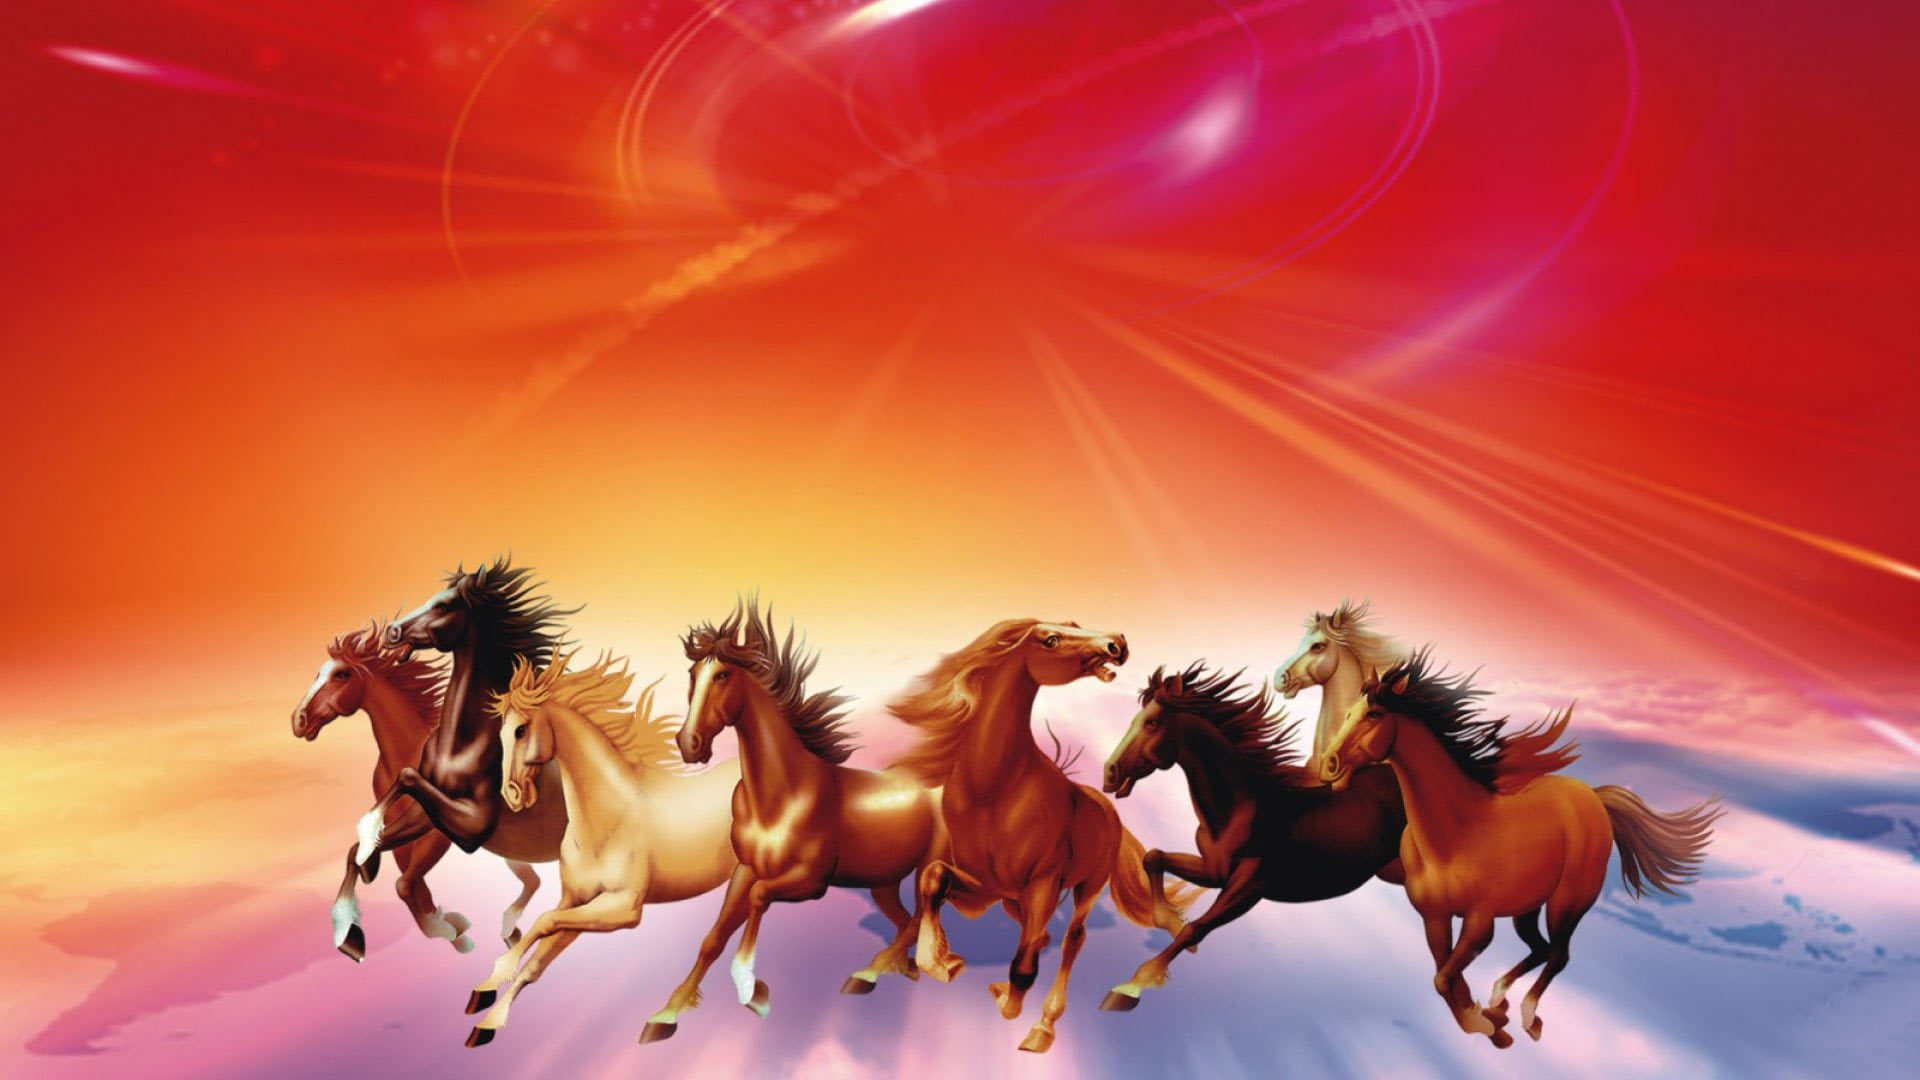 Seven Horses Wallpaper HD 7 Lucky Horse Free Download